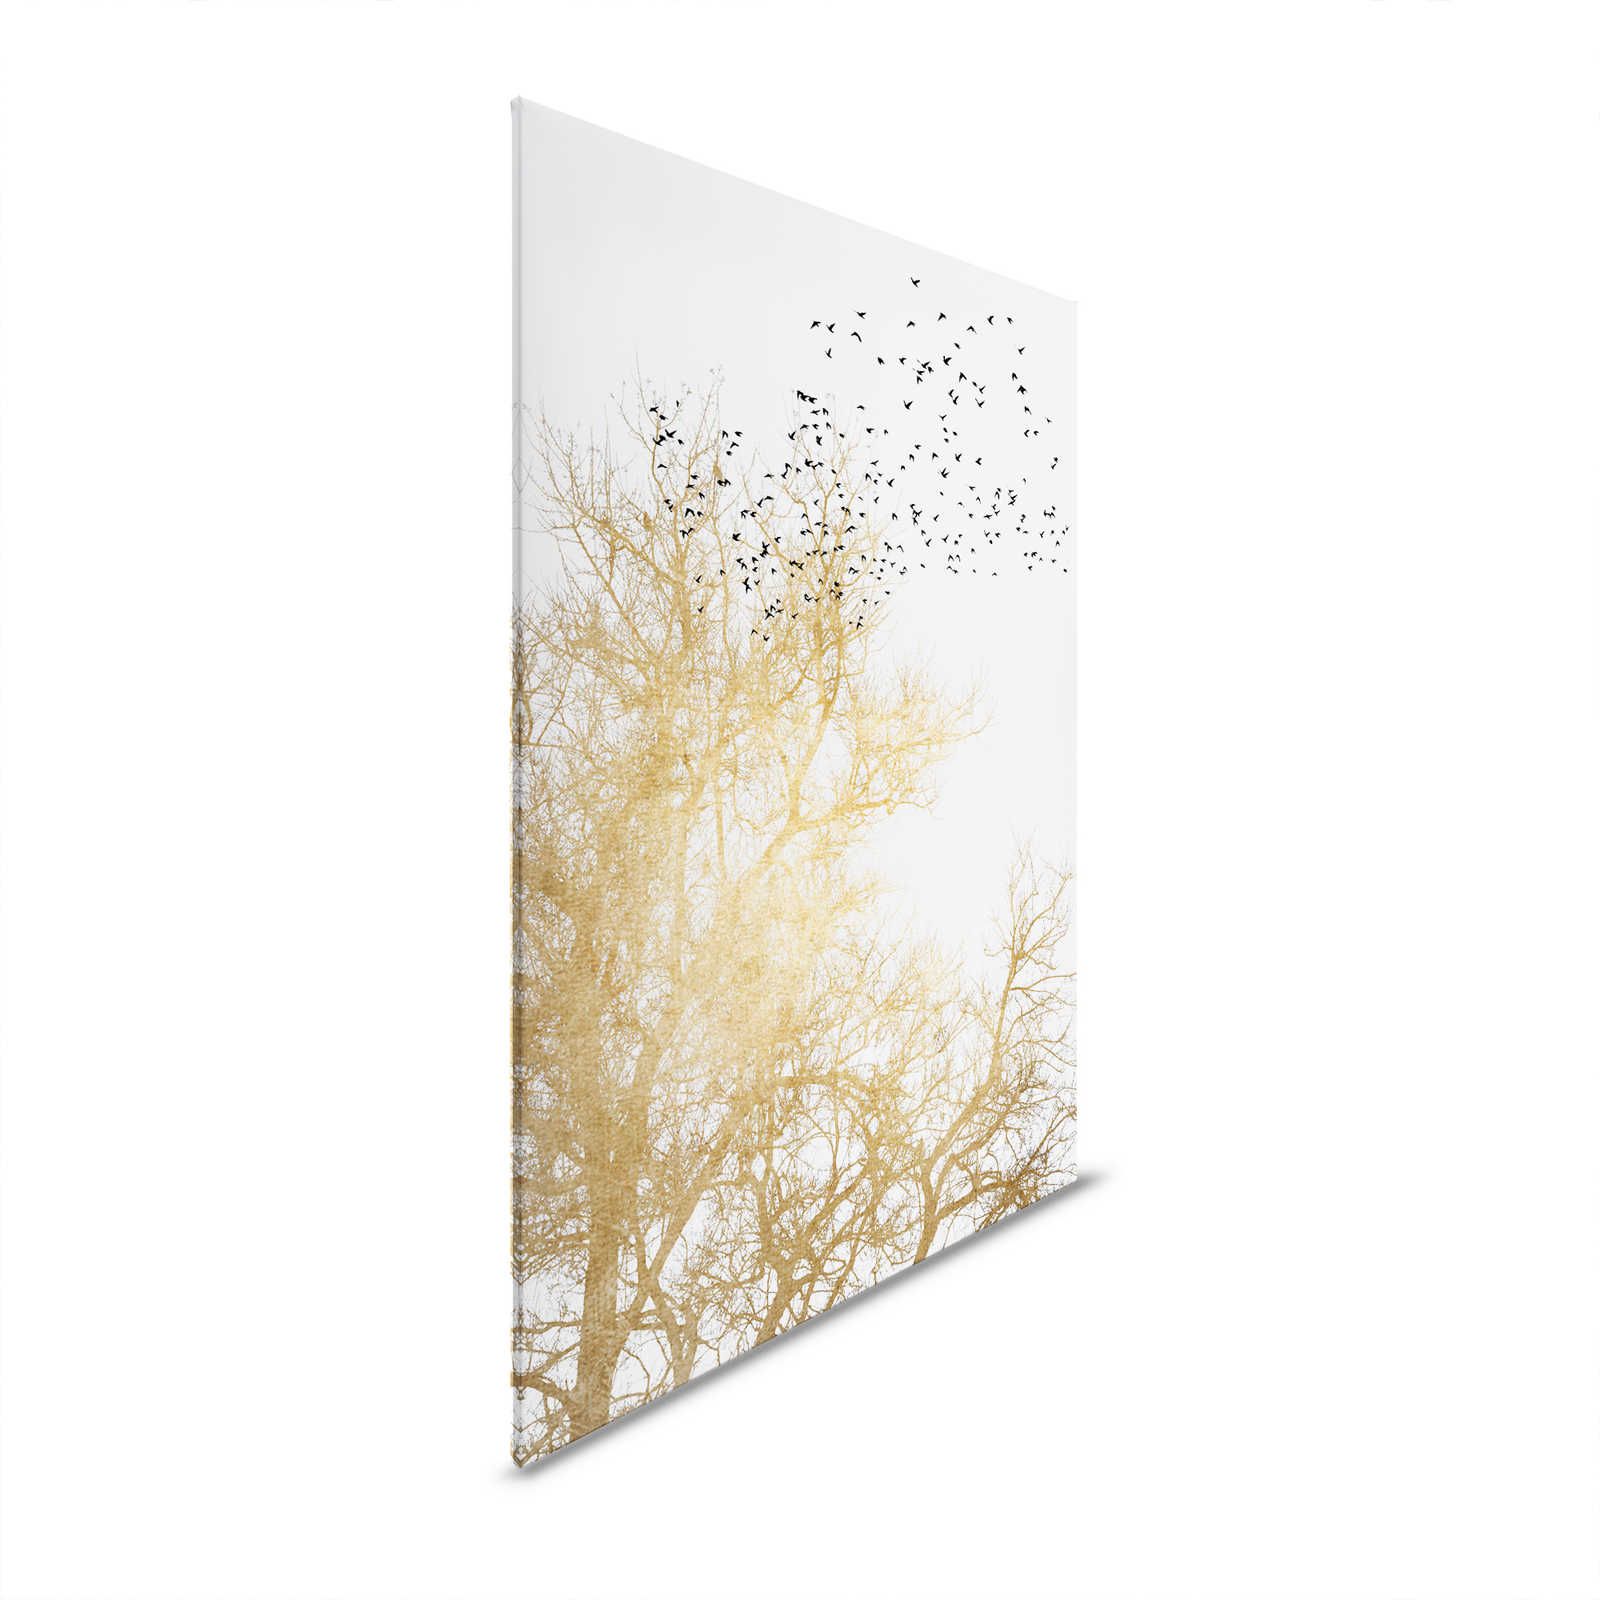 Canvas painting with golden trees and flock of birds - 0.90 m x 0.60 m
